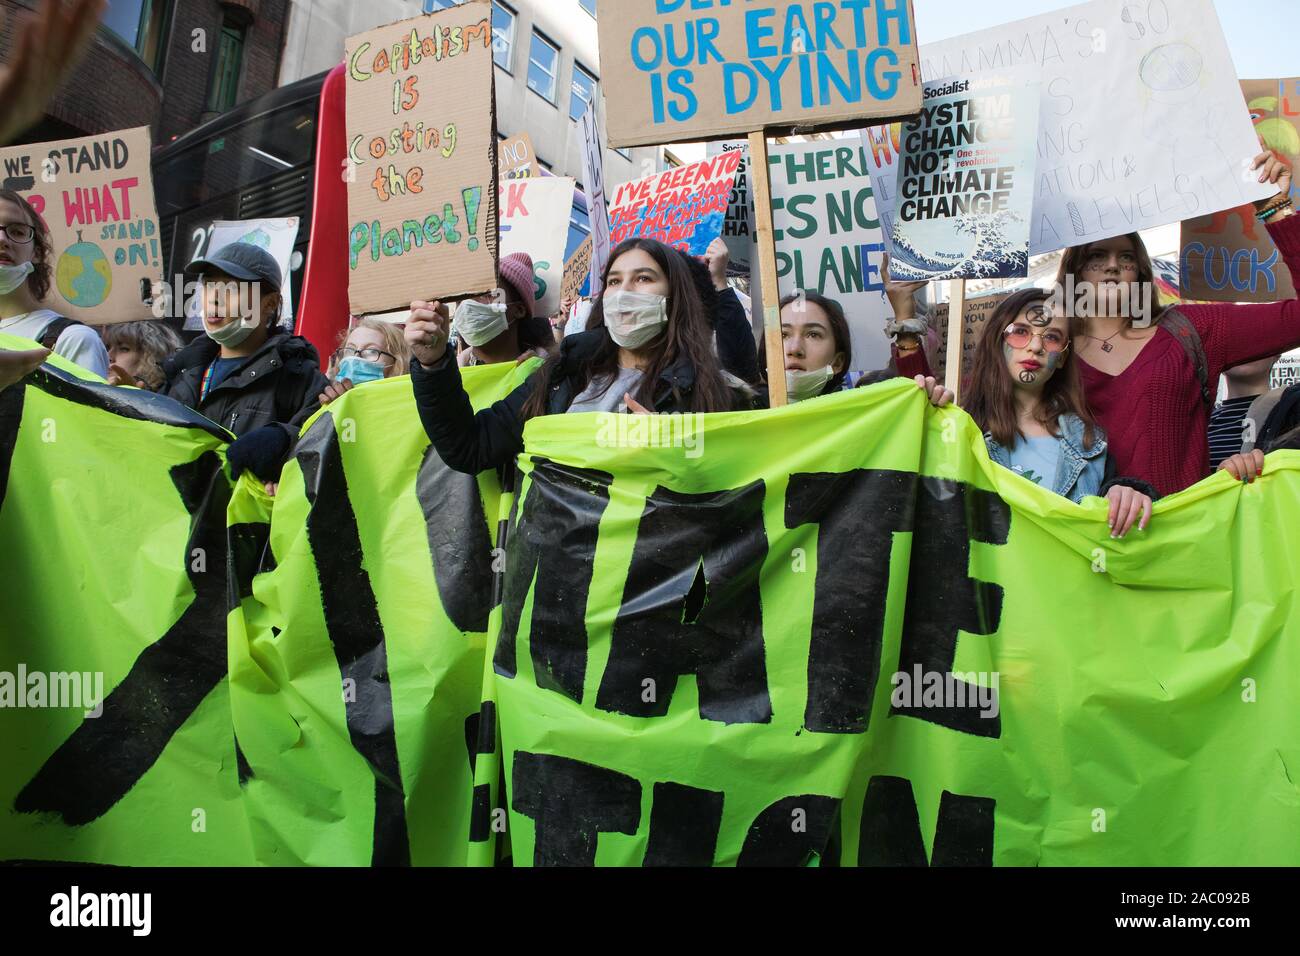 Westminster, London, UK. 29 November 2019. Hundreds of school children turn out for a global Climate Emergency Strike in London organised by the UK Student Climate Network. Police diverts the protesters in Regent Street to prevent them reaching Oxford Circus. Stock Photo